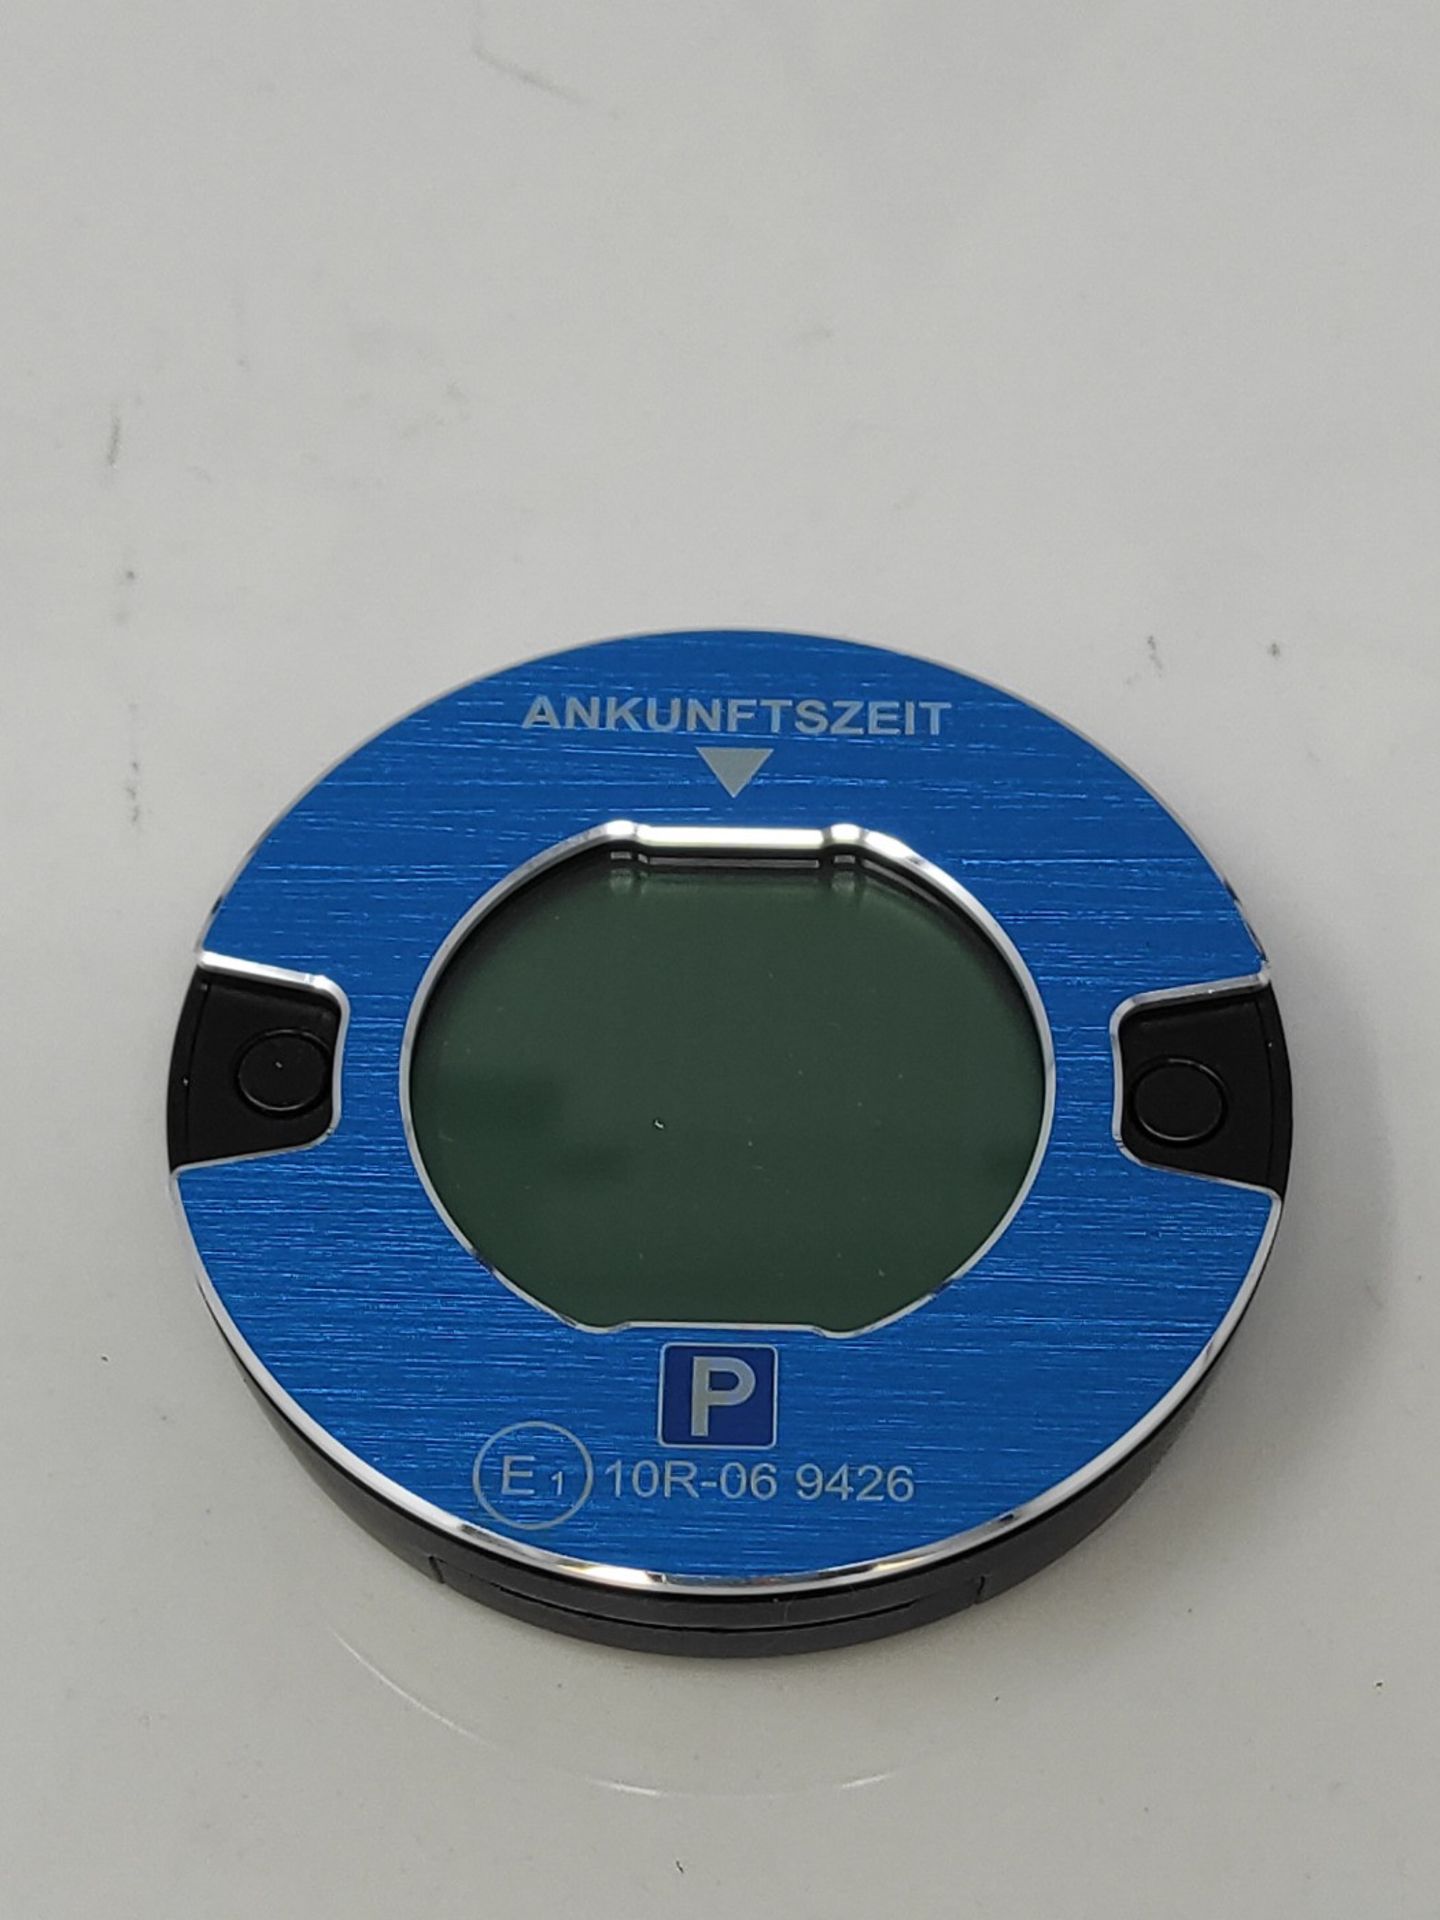 ooono Park - Electronic parking disc approved for your car - Automatic digital electri - Image 2 of 2